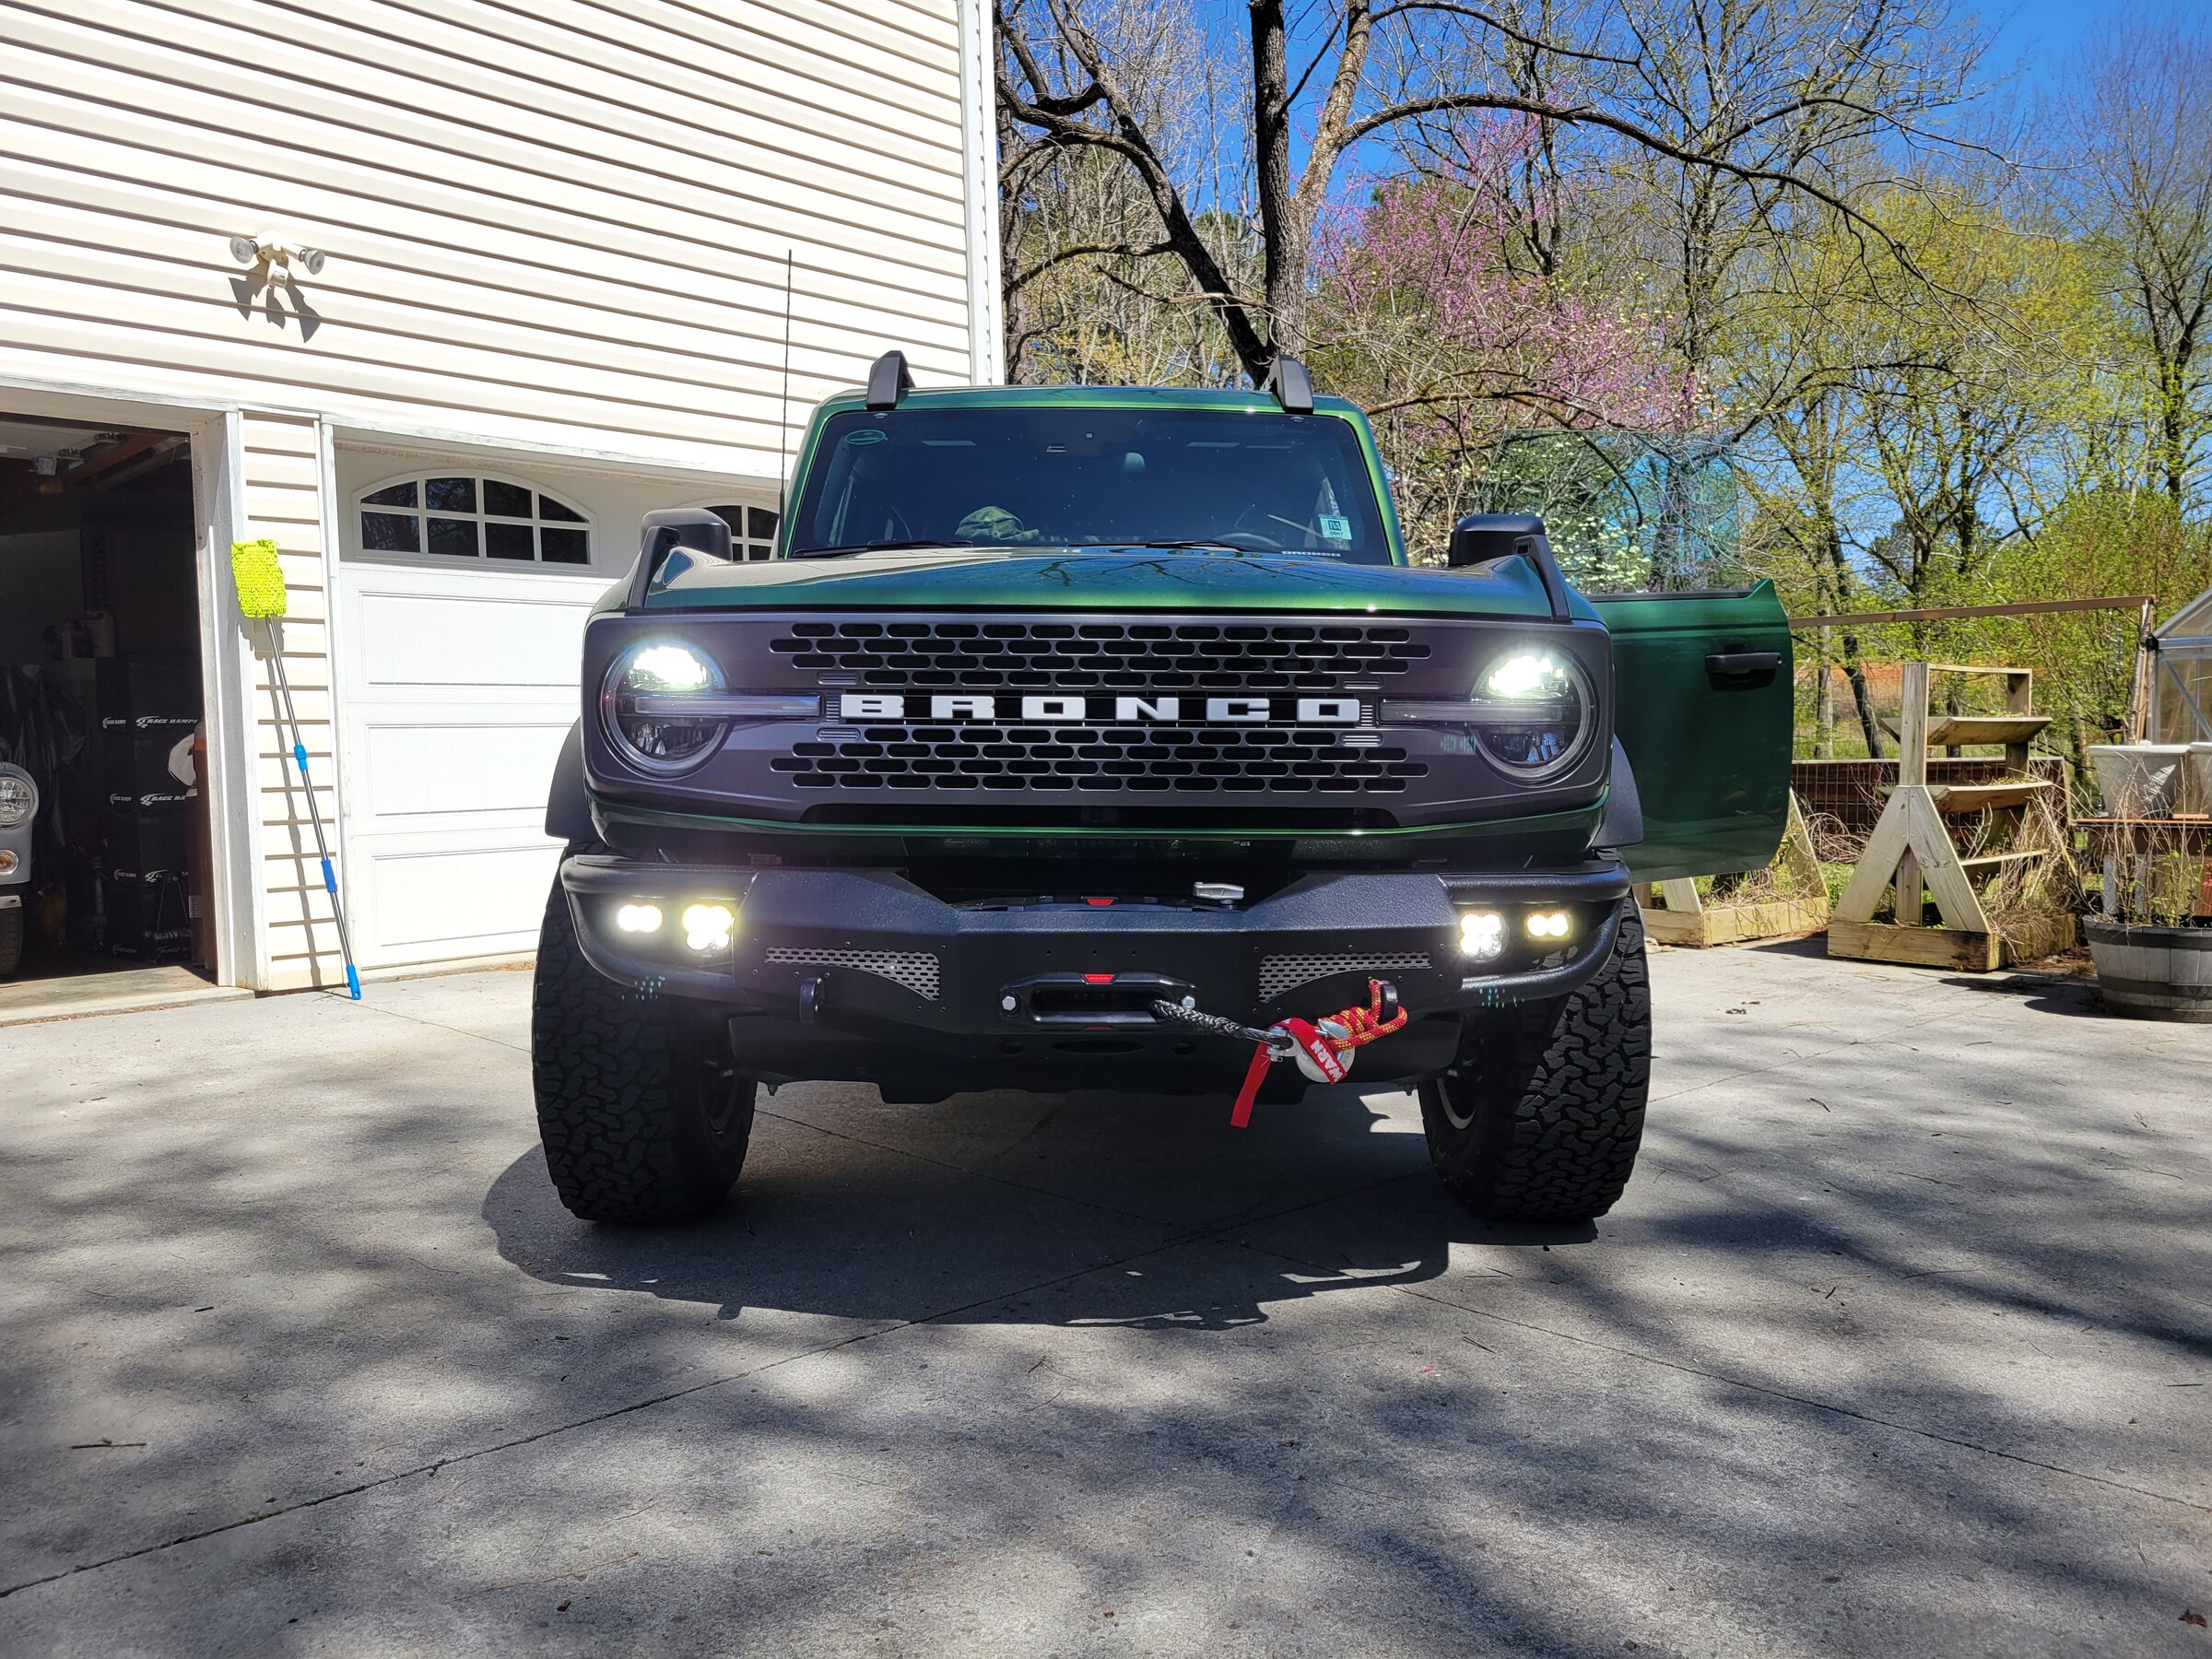 Ford Bronco BAMF Bumper install. Who's done it? 20220403_141746